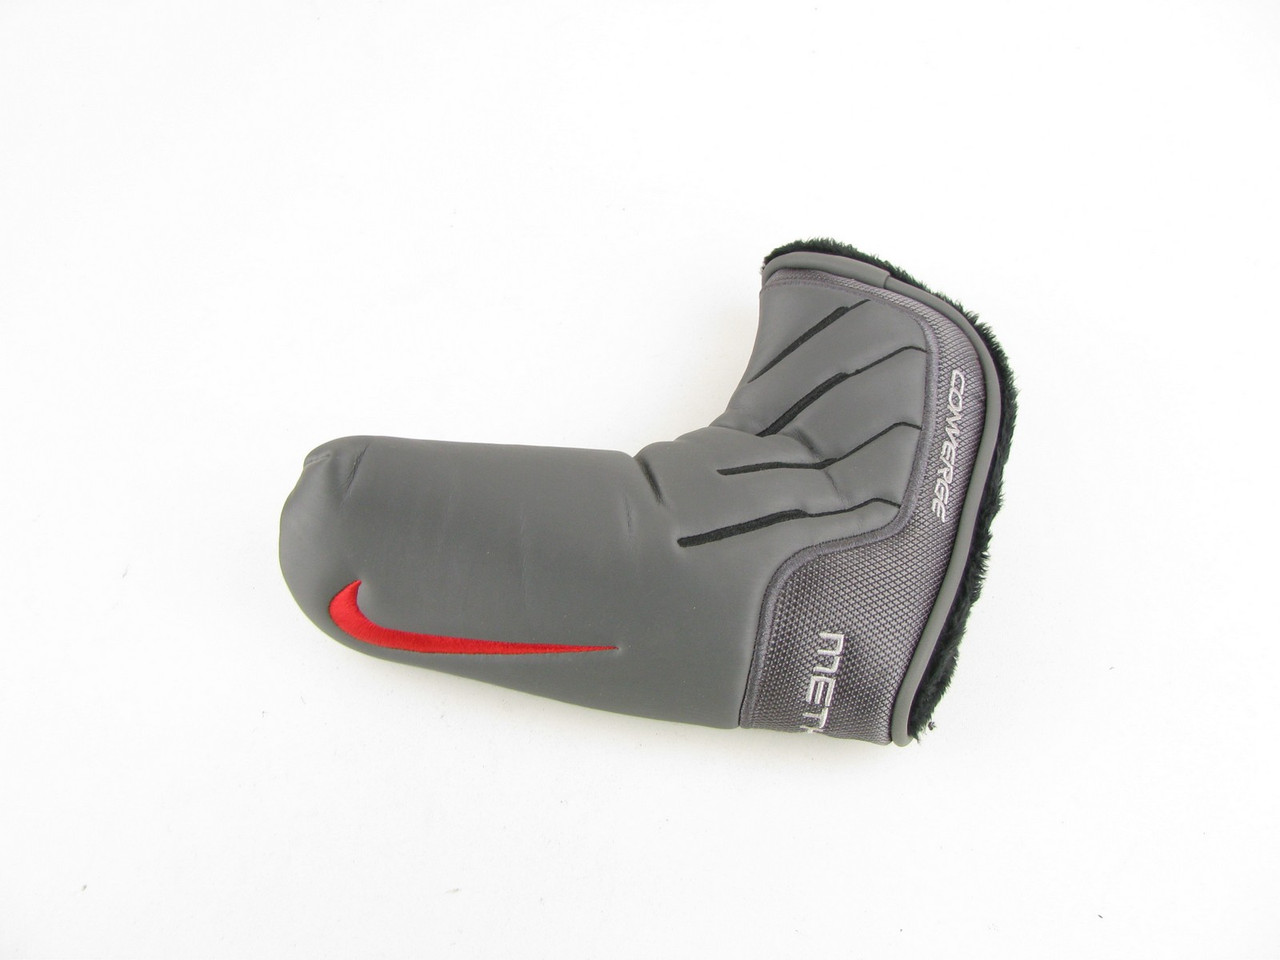 NEW Nike Method Converge Blade Putter Headcover - Clubs n Covers Golf